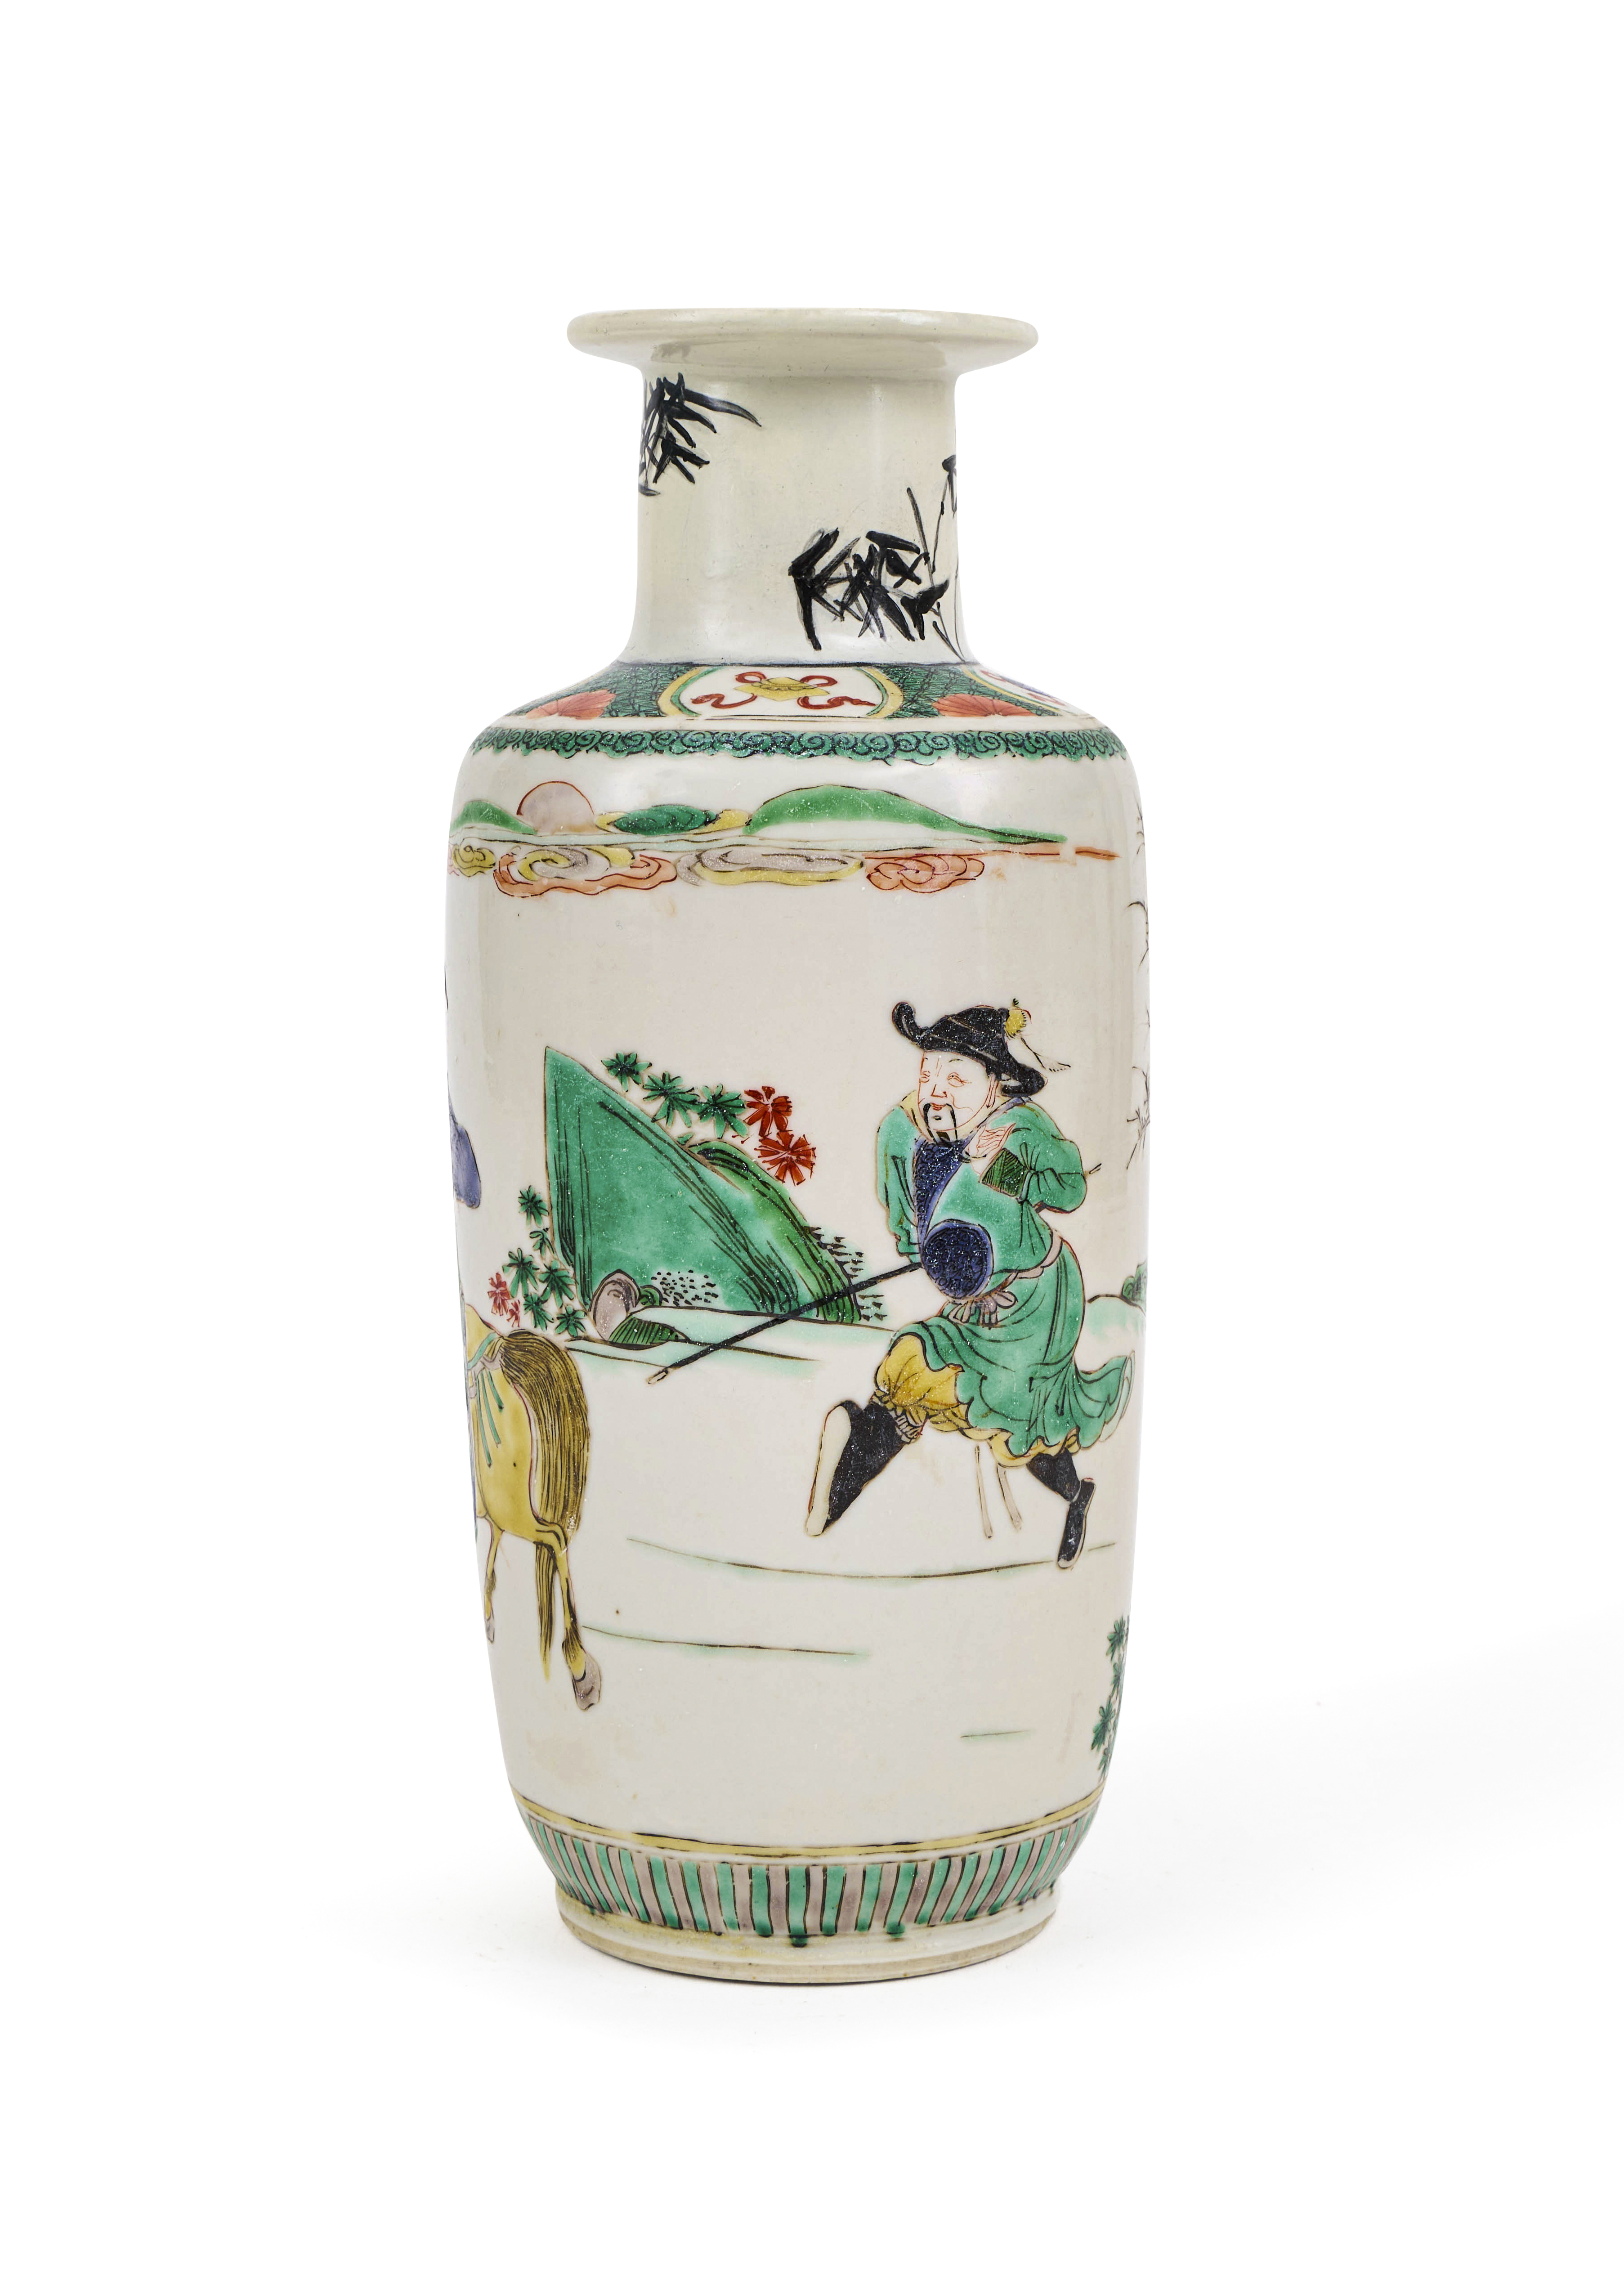 A CHINESE FAMILLE VERTE ROULEAU VASE, 18TH CENTURY - Image 3 of 5